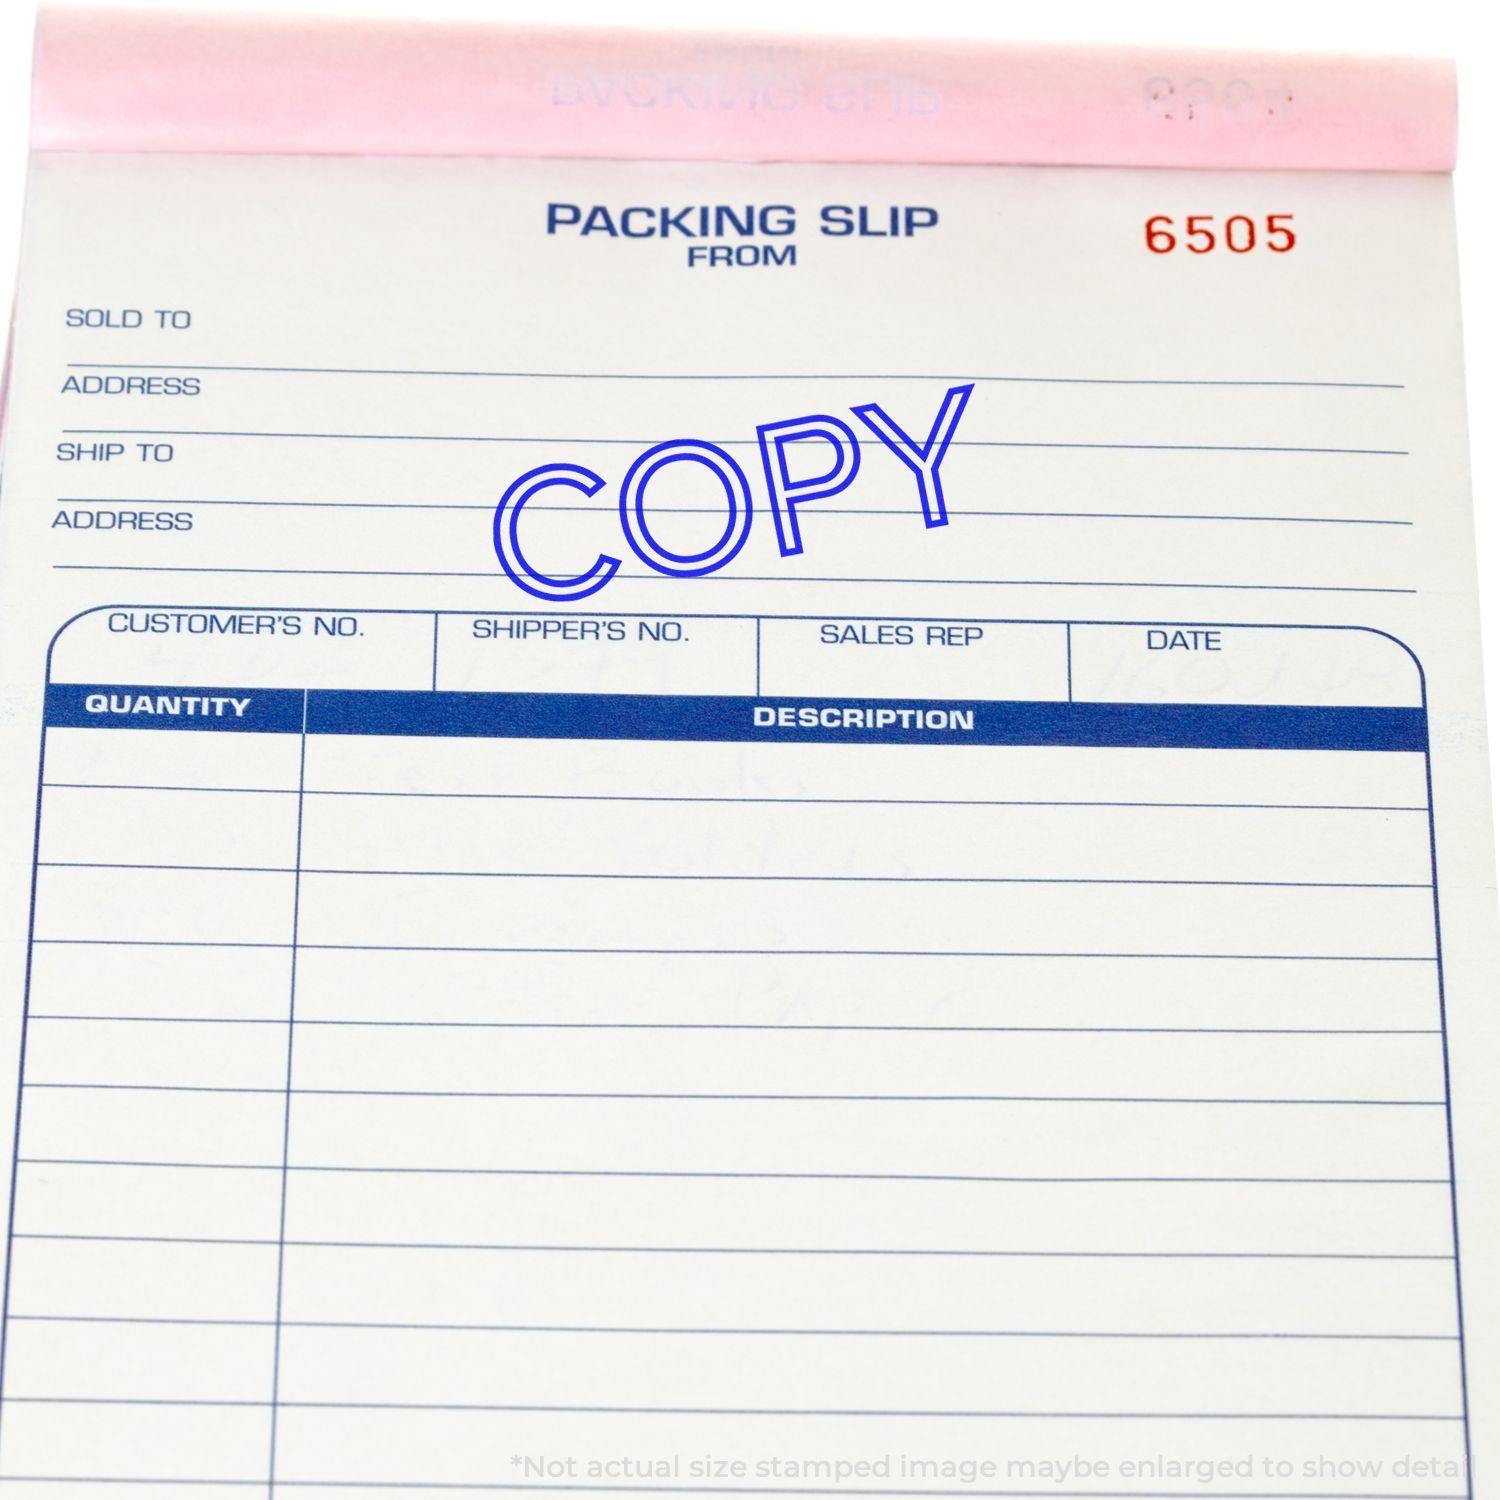 A stock office rubber stamp with a stamped image showing how the text "COPY" in a large outline font is displayed after stamping.